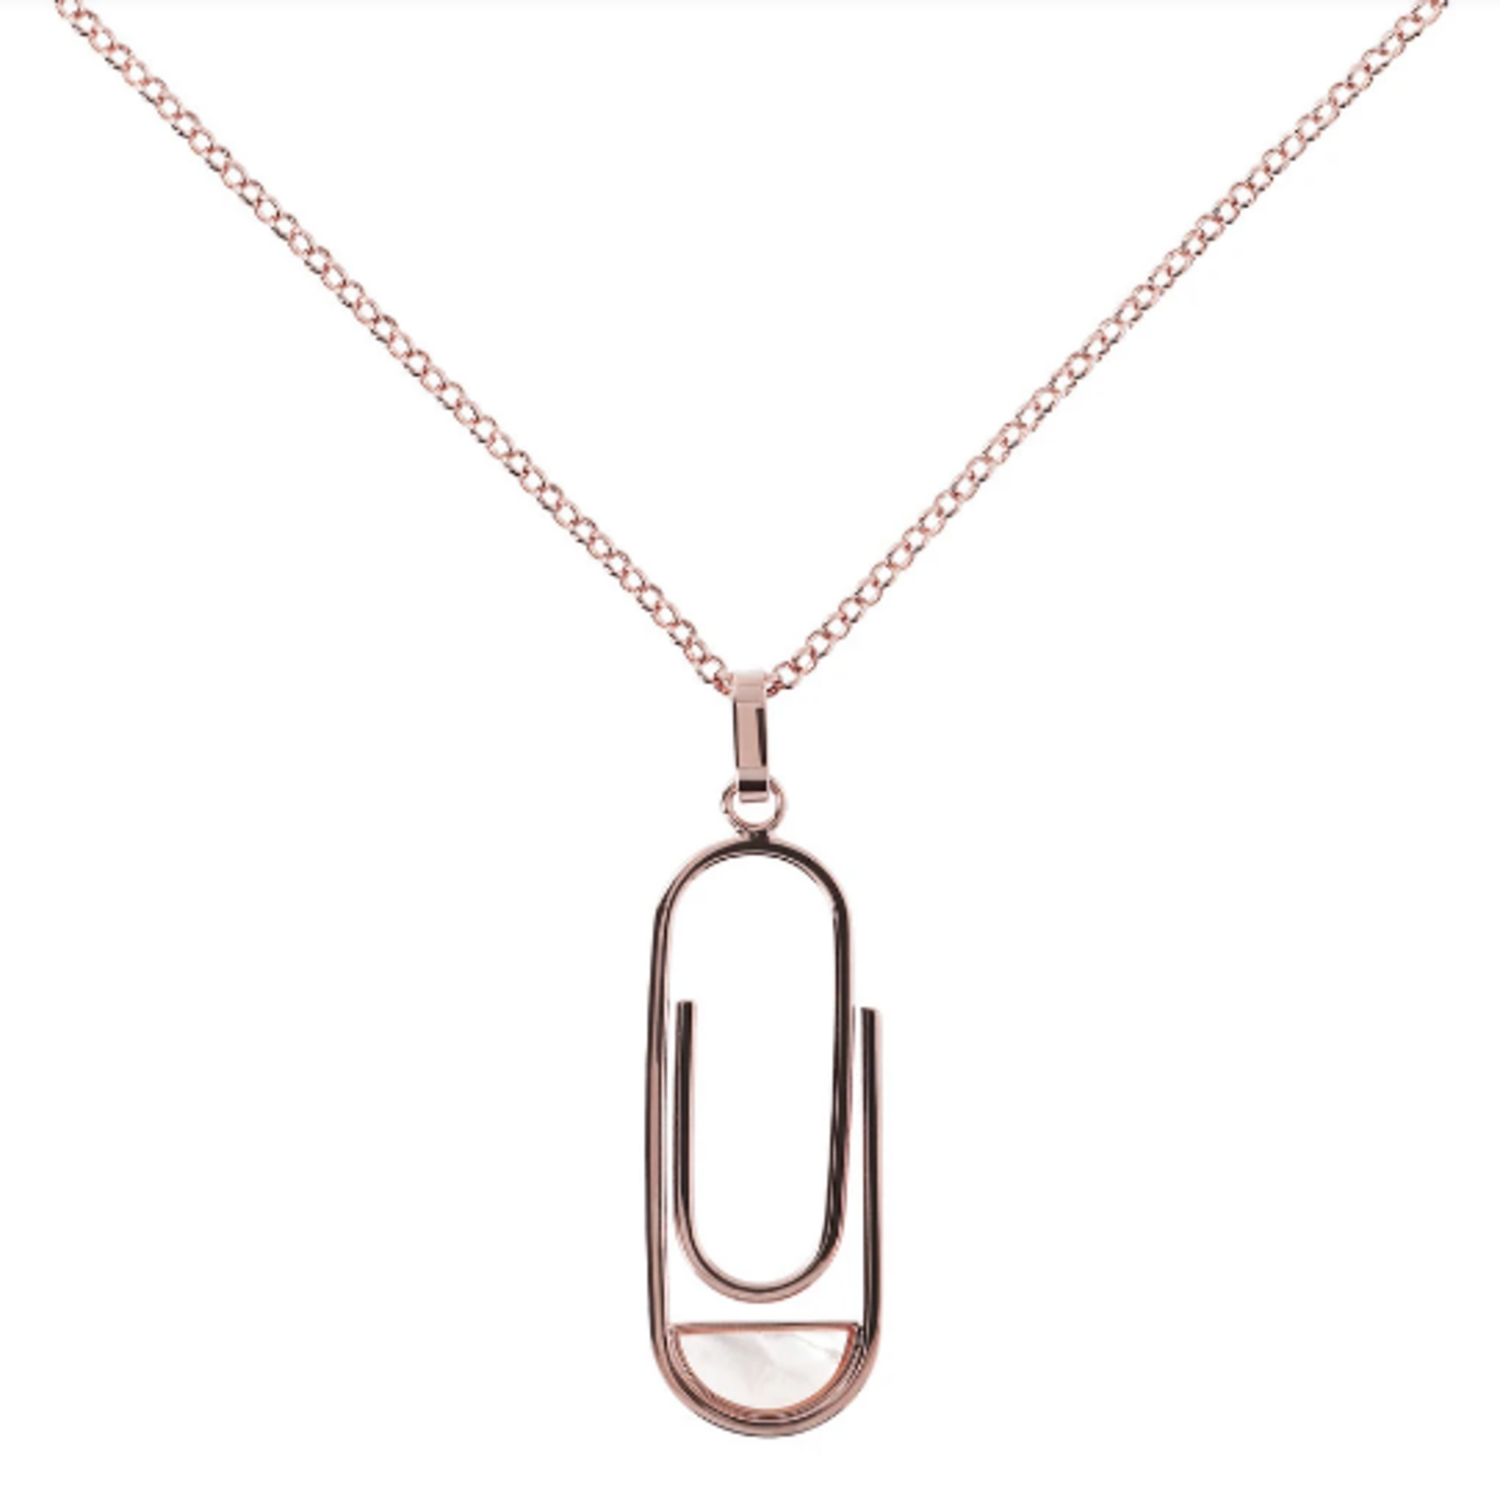 BITZ PAPERCLIP N CZ MOTHER OF PEARL CLOVER NECKLACE PENDANT